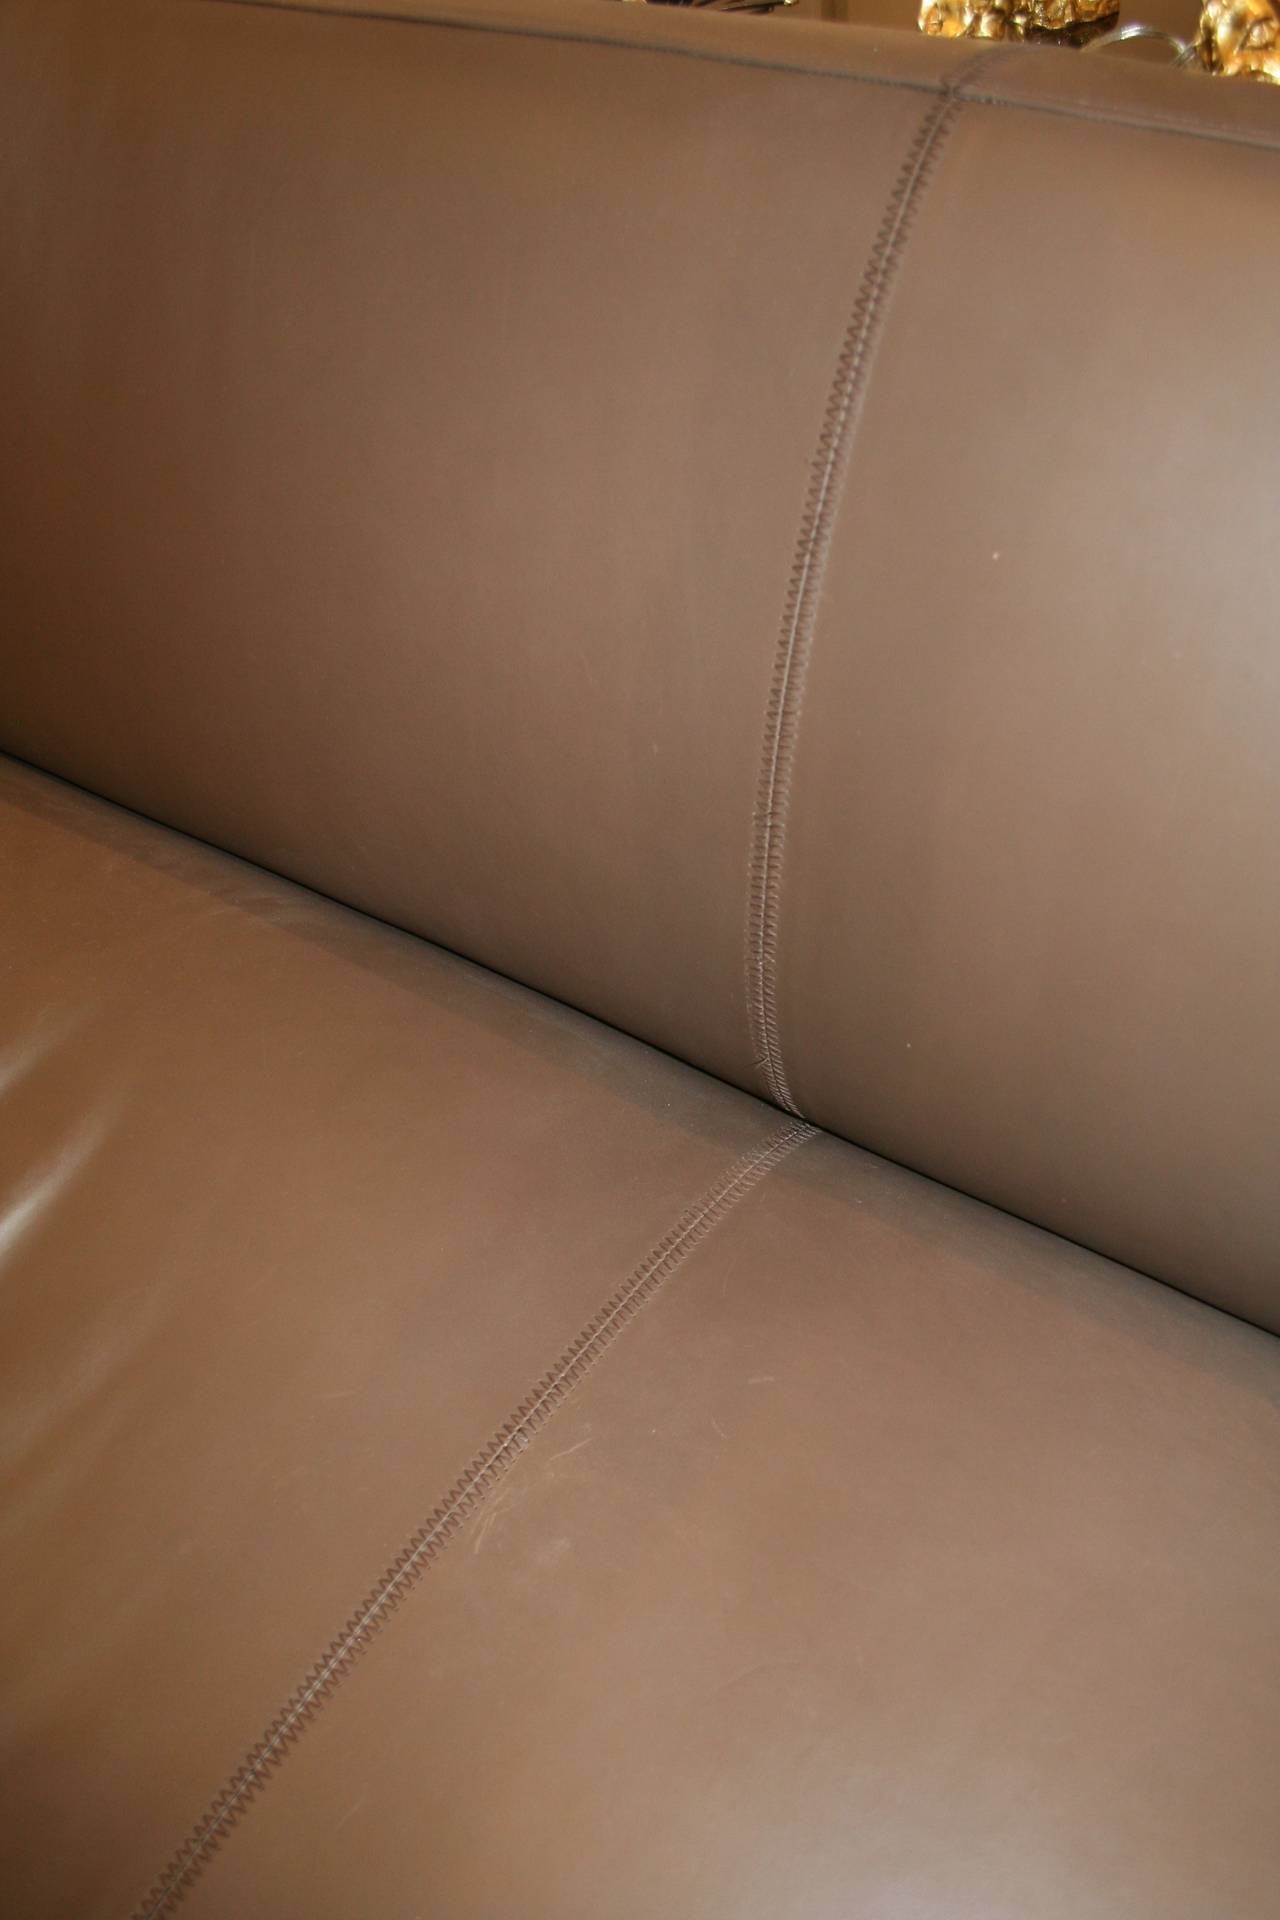 Mid-Century Modern Emily Summers Studio Line Geoffrey Beene Sofa in Chocolate Top-Stitch Leather For Sale